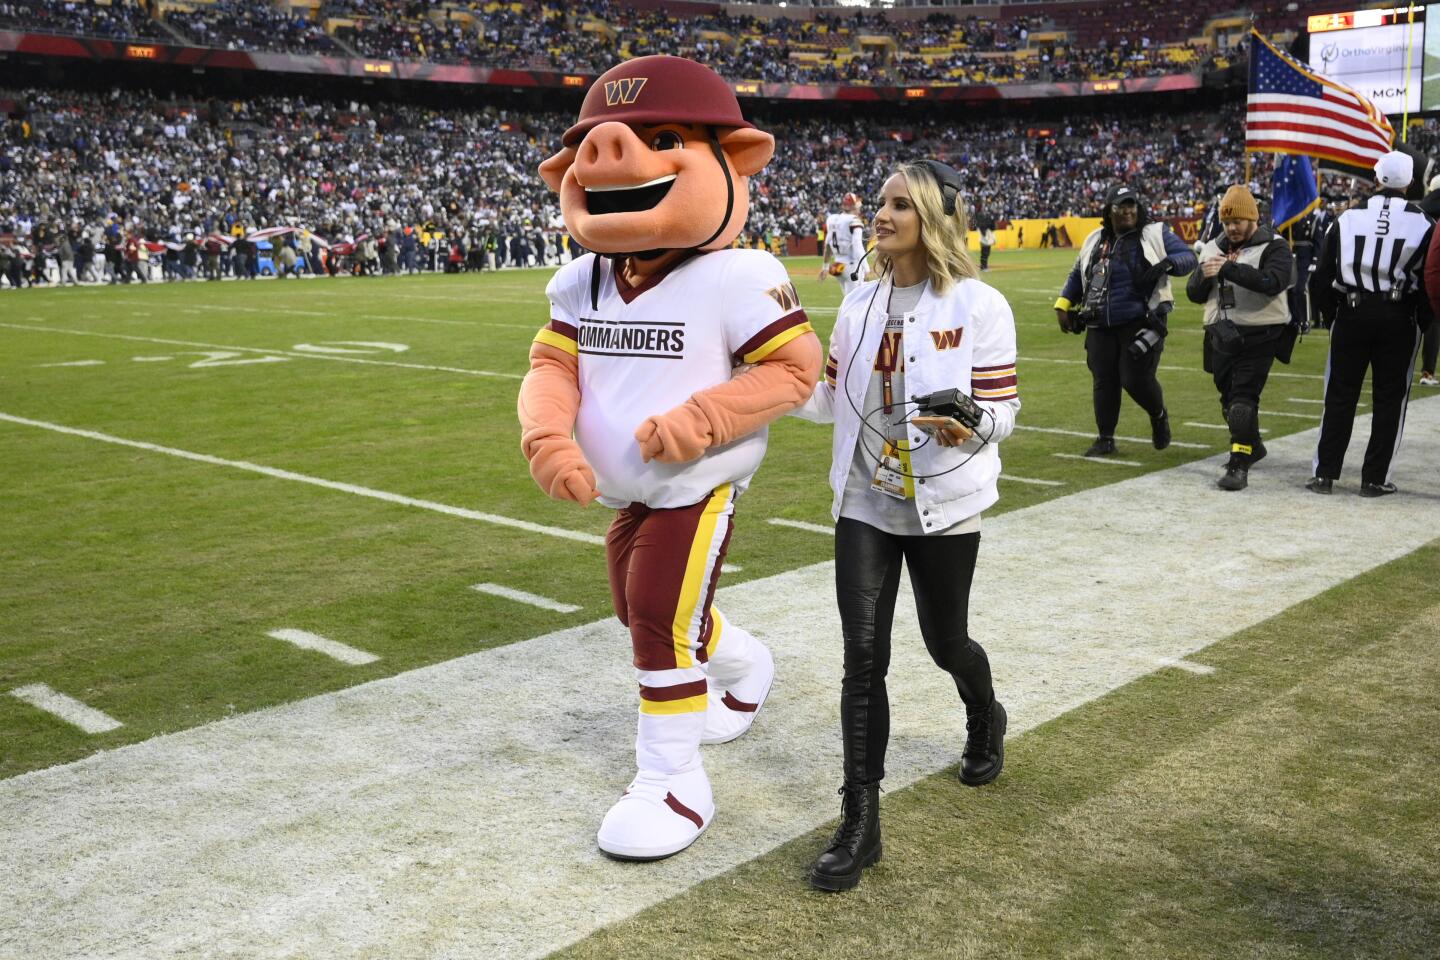 Want to meet an NFL mascot? We can help you see them all - Los Angeles Times